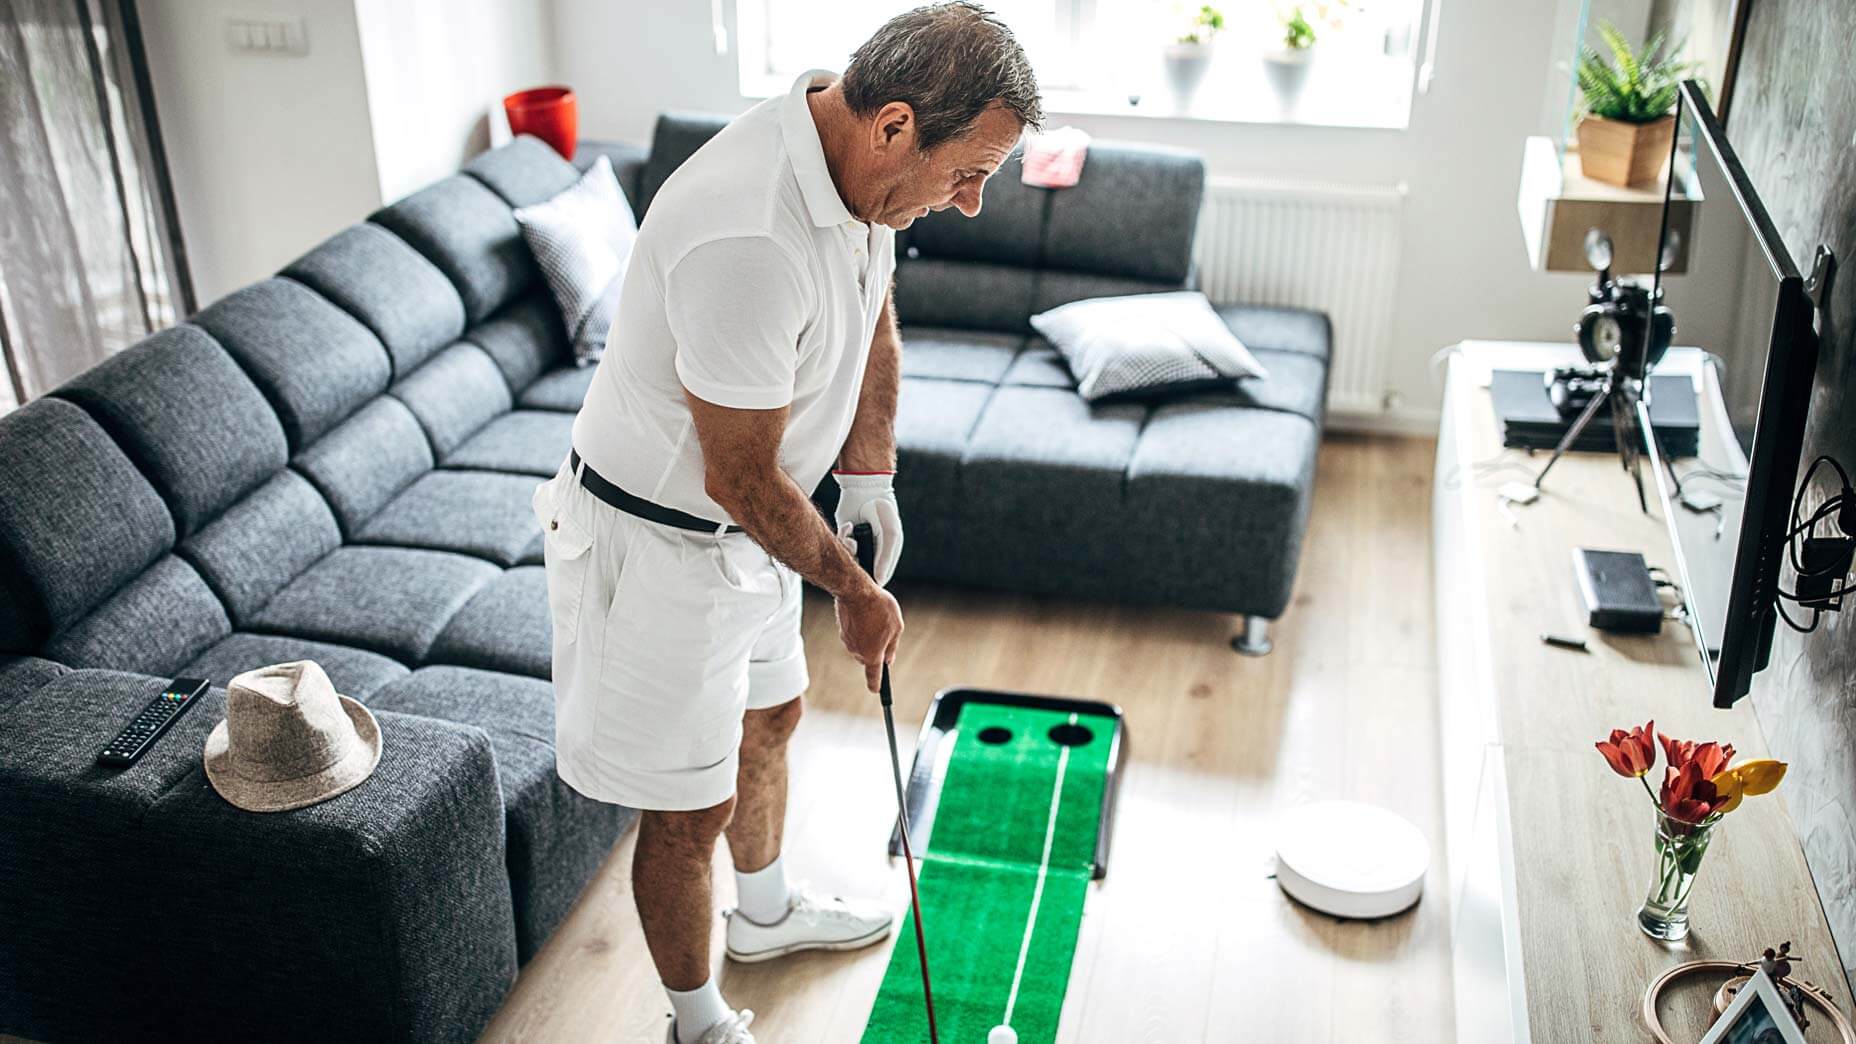 How to practice Golf at Home and at the Range